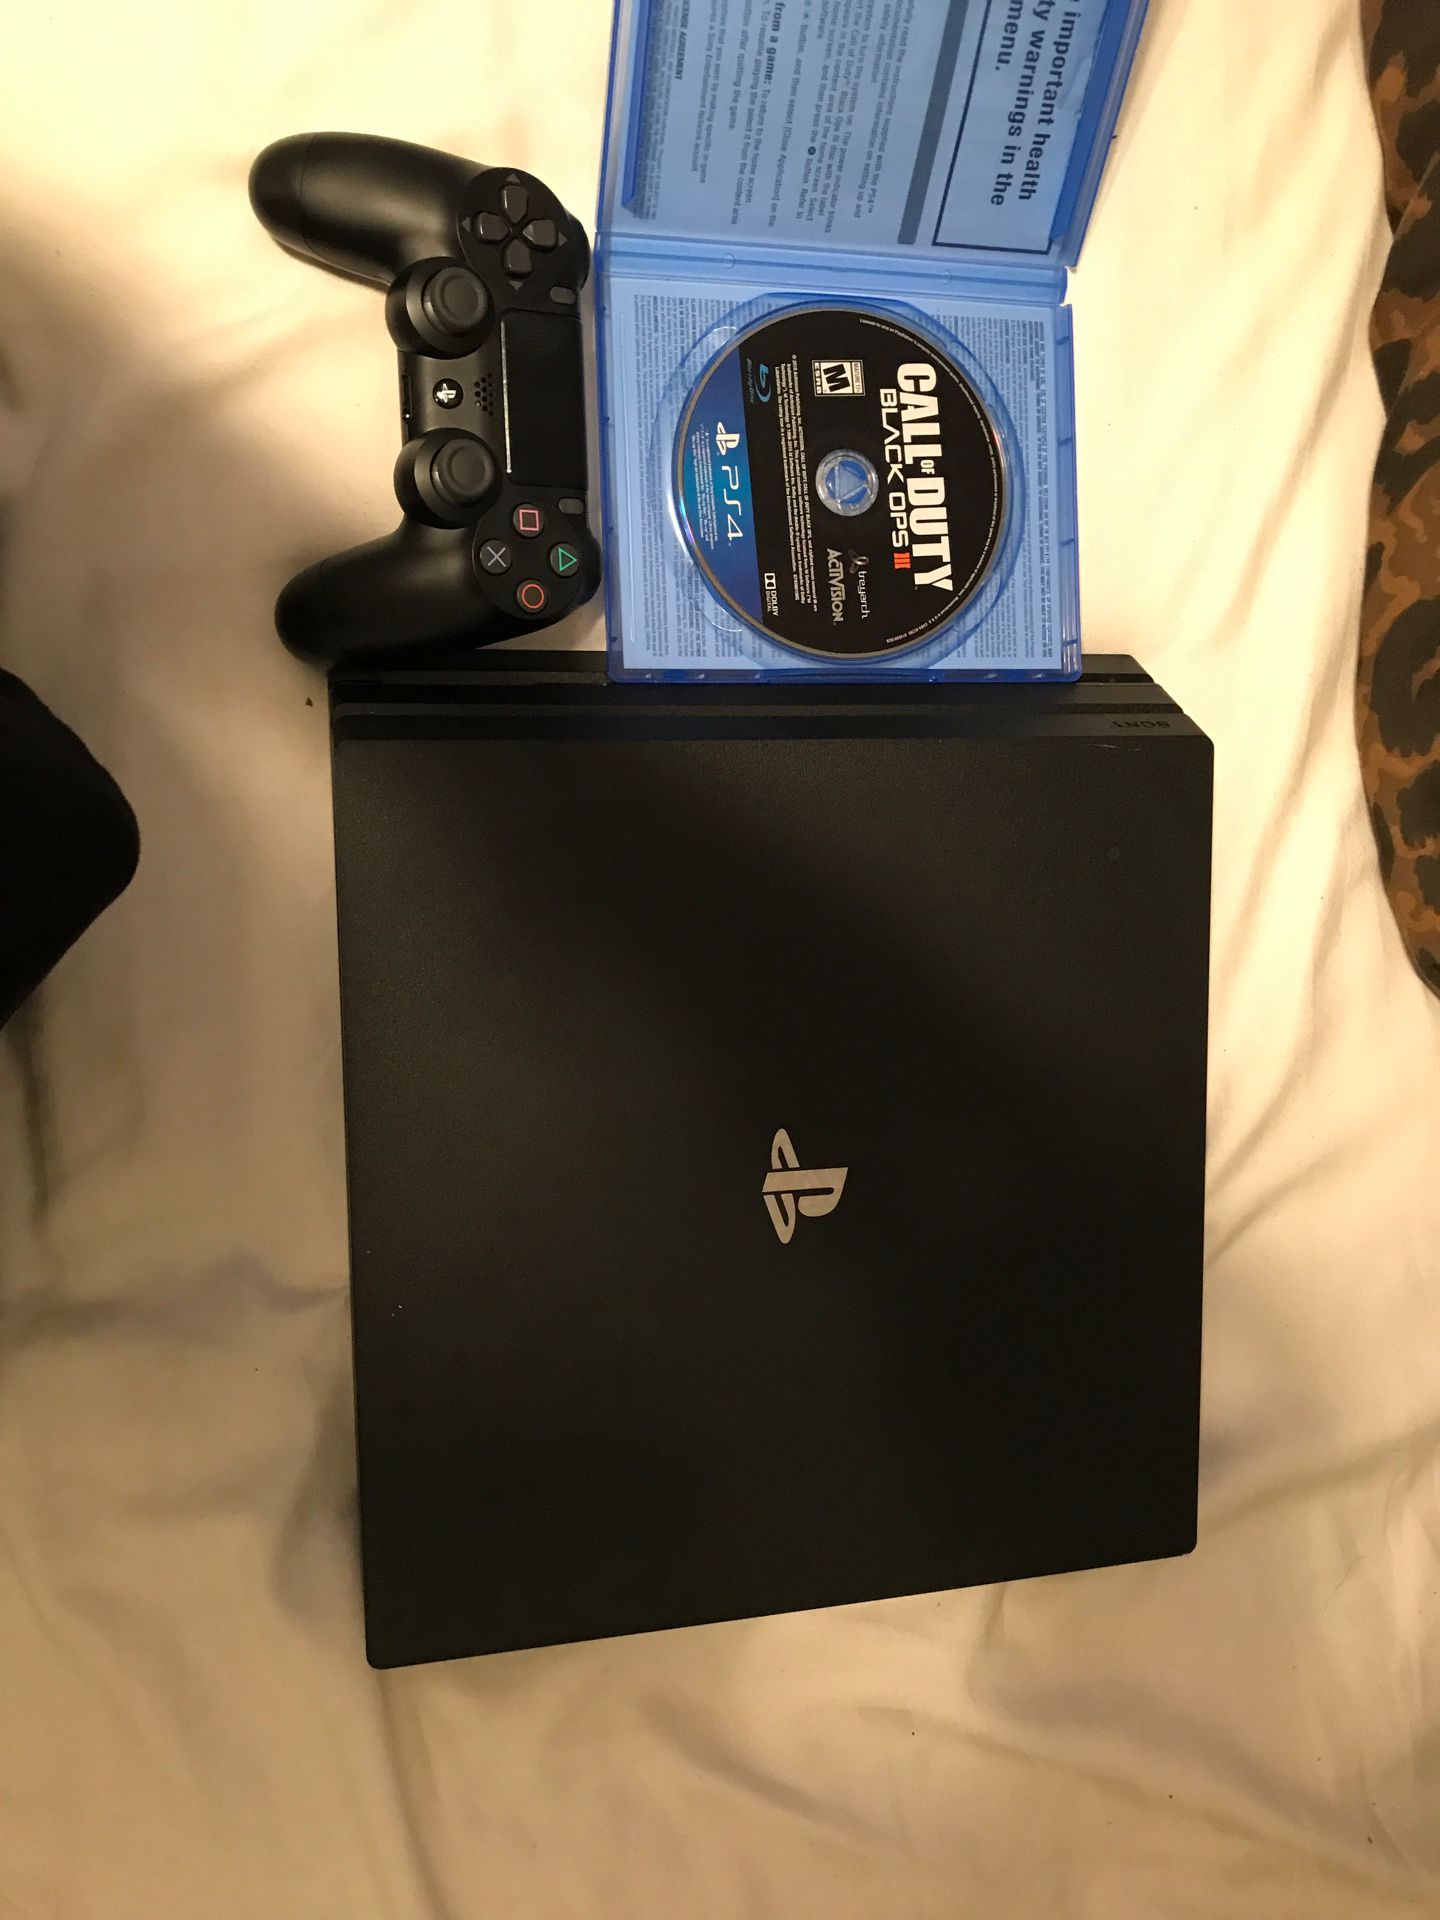 Ps4 Pro for sale!!